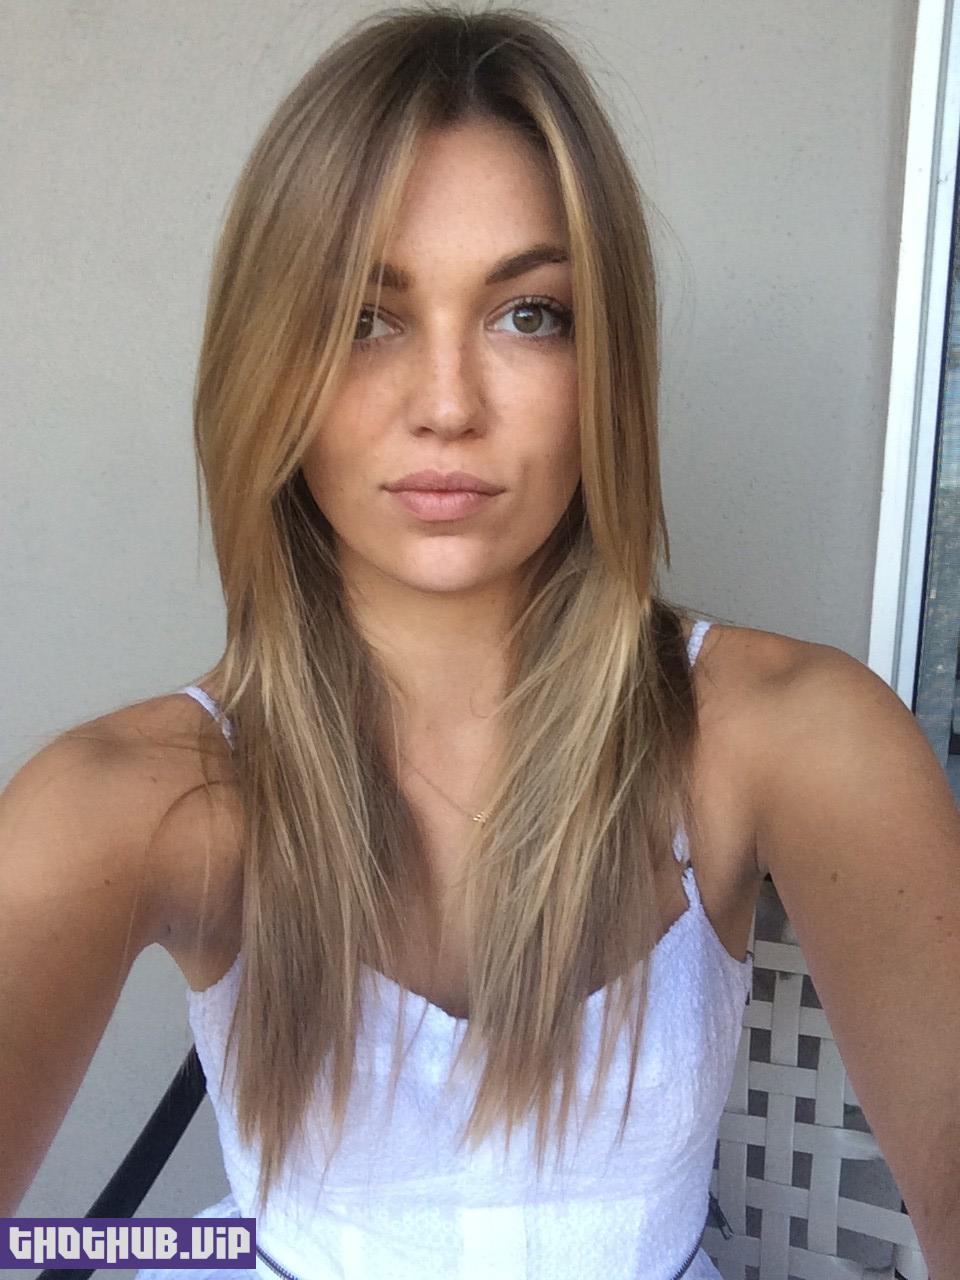 Lili Simmons nude photos leaked The Fappening